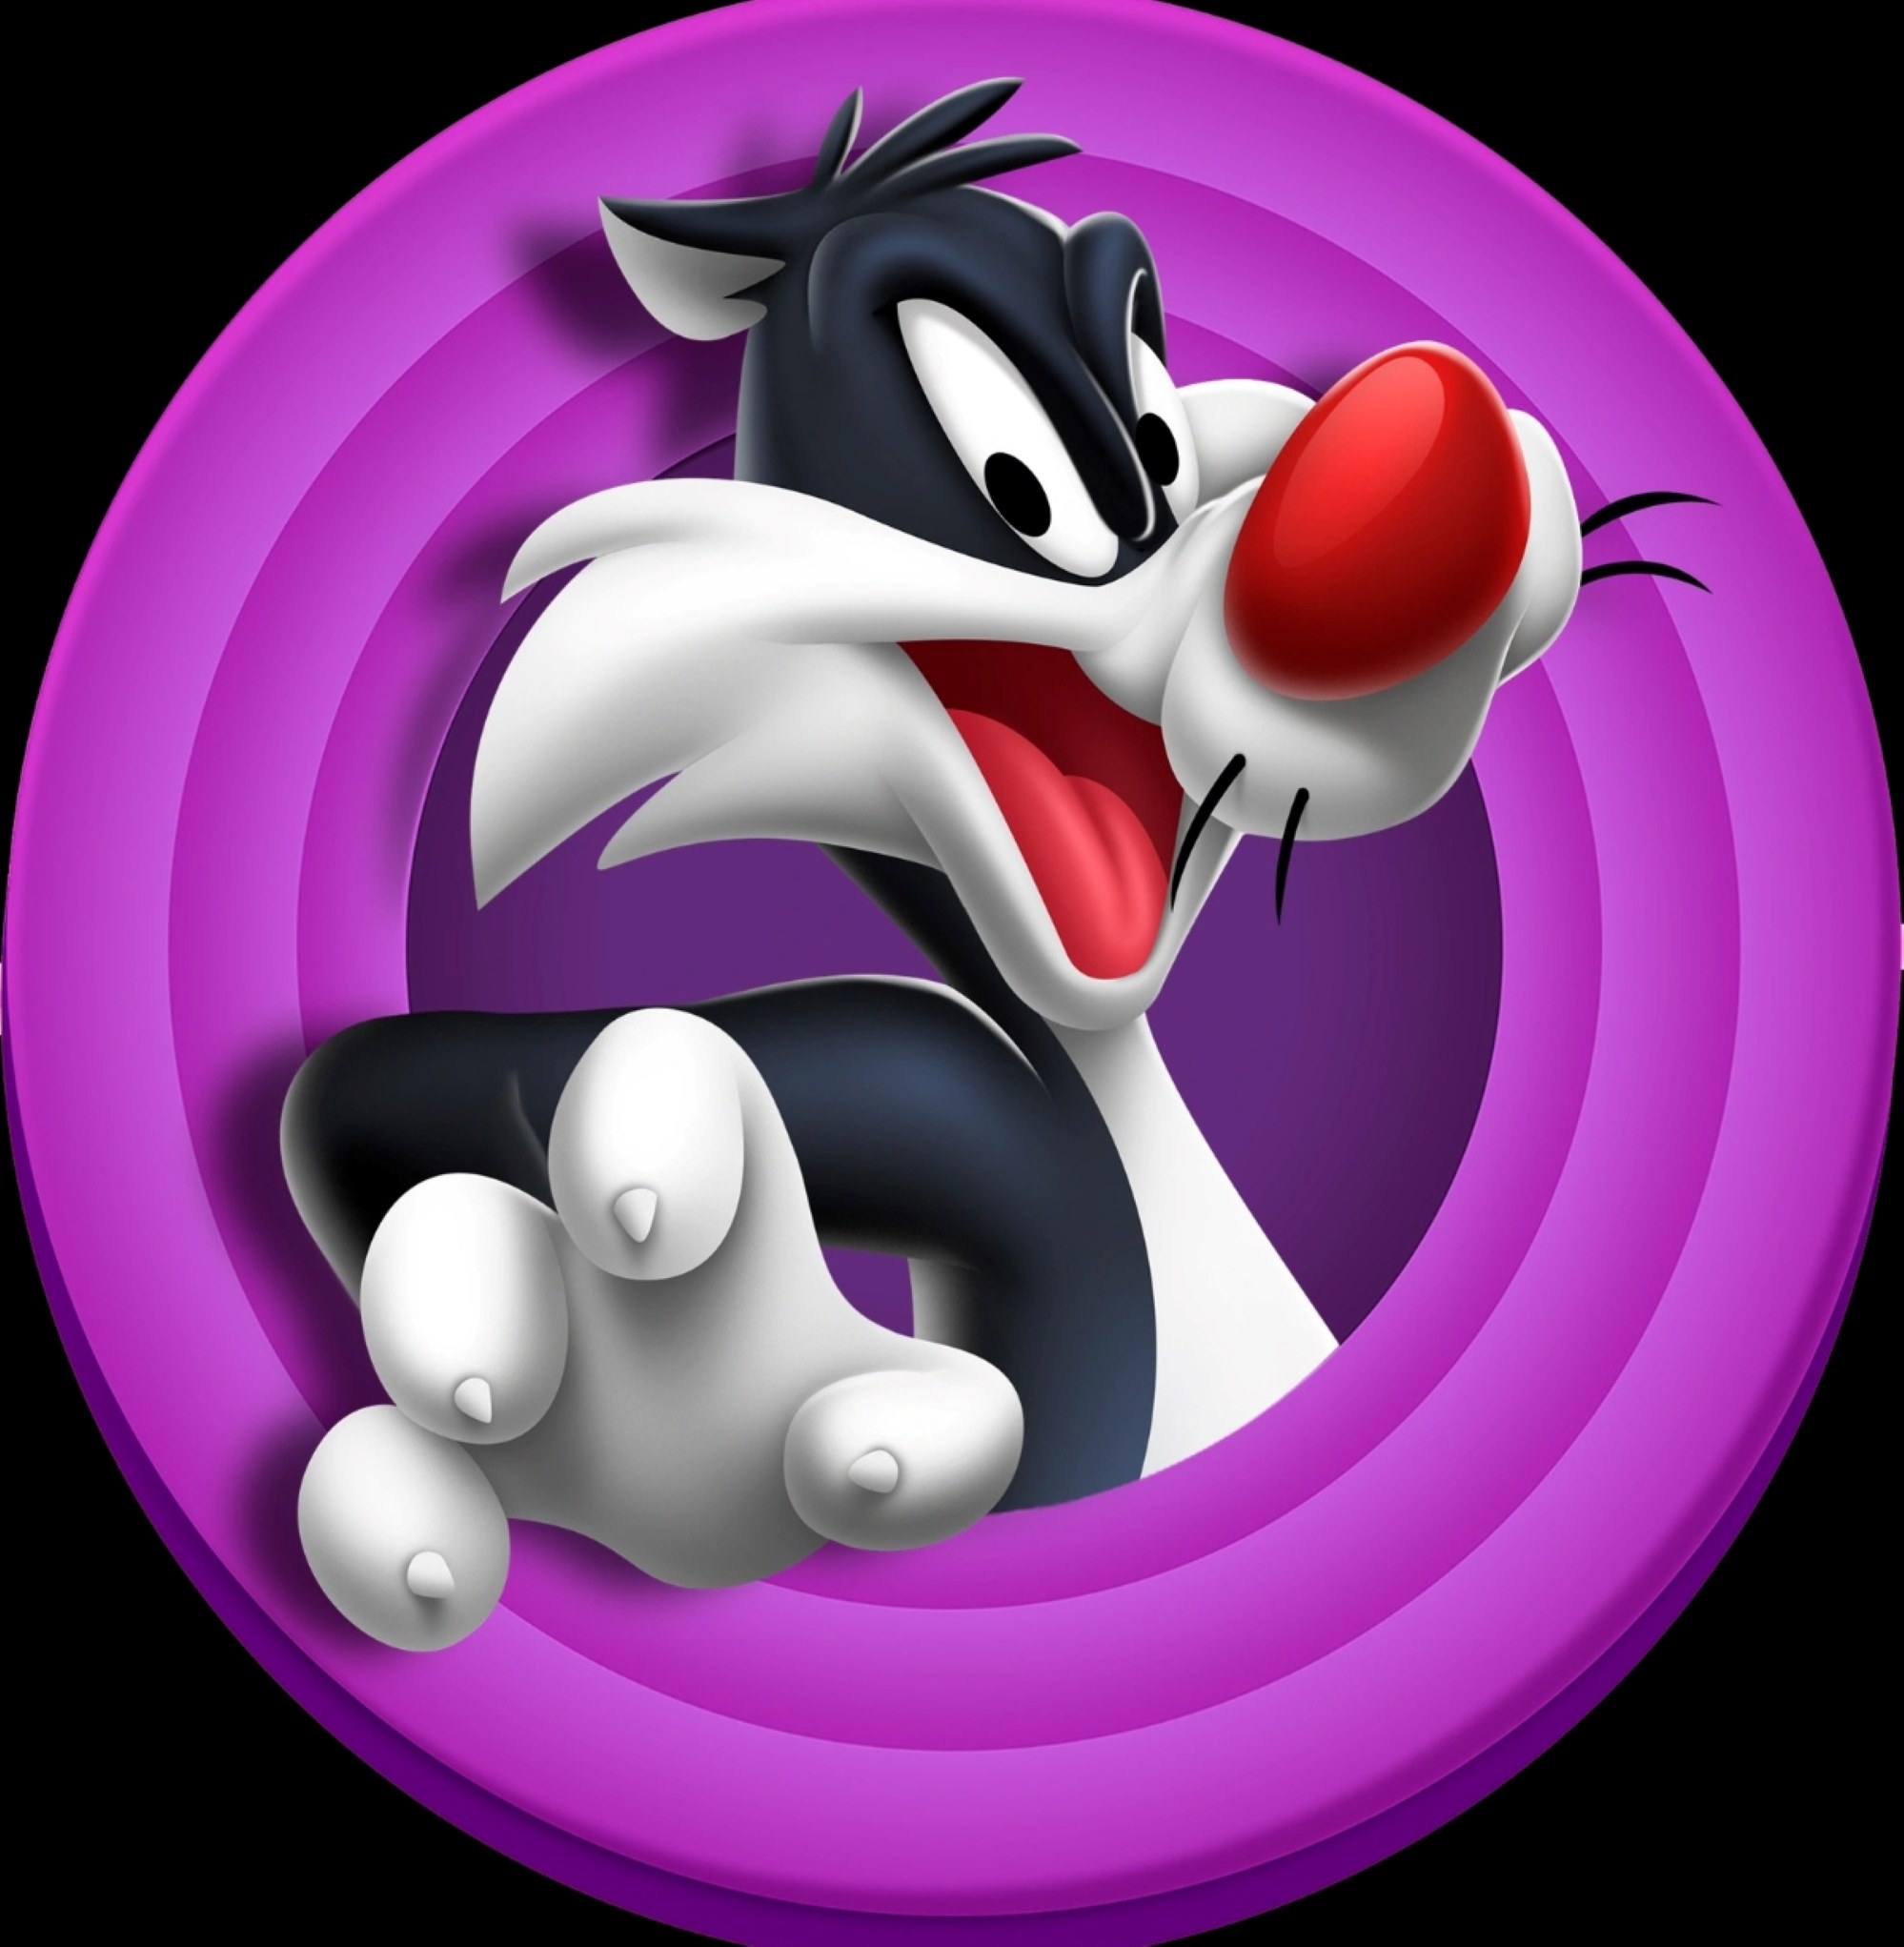 17 Facts About Sylvester (Looney Tunes) - Facts.net